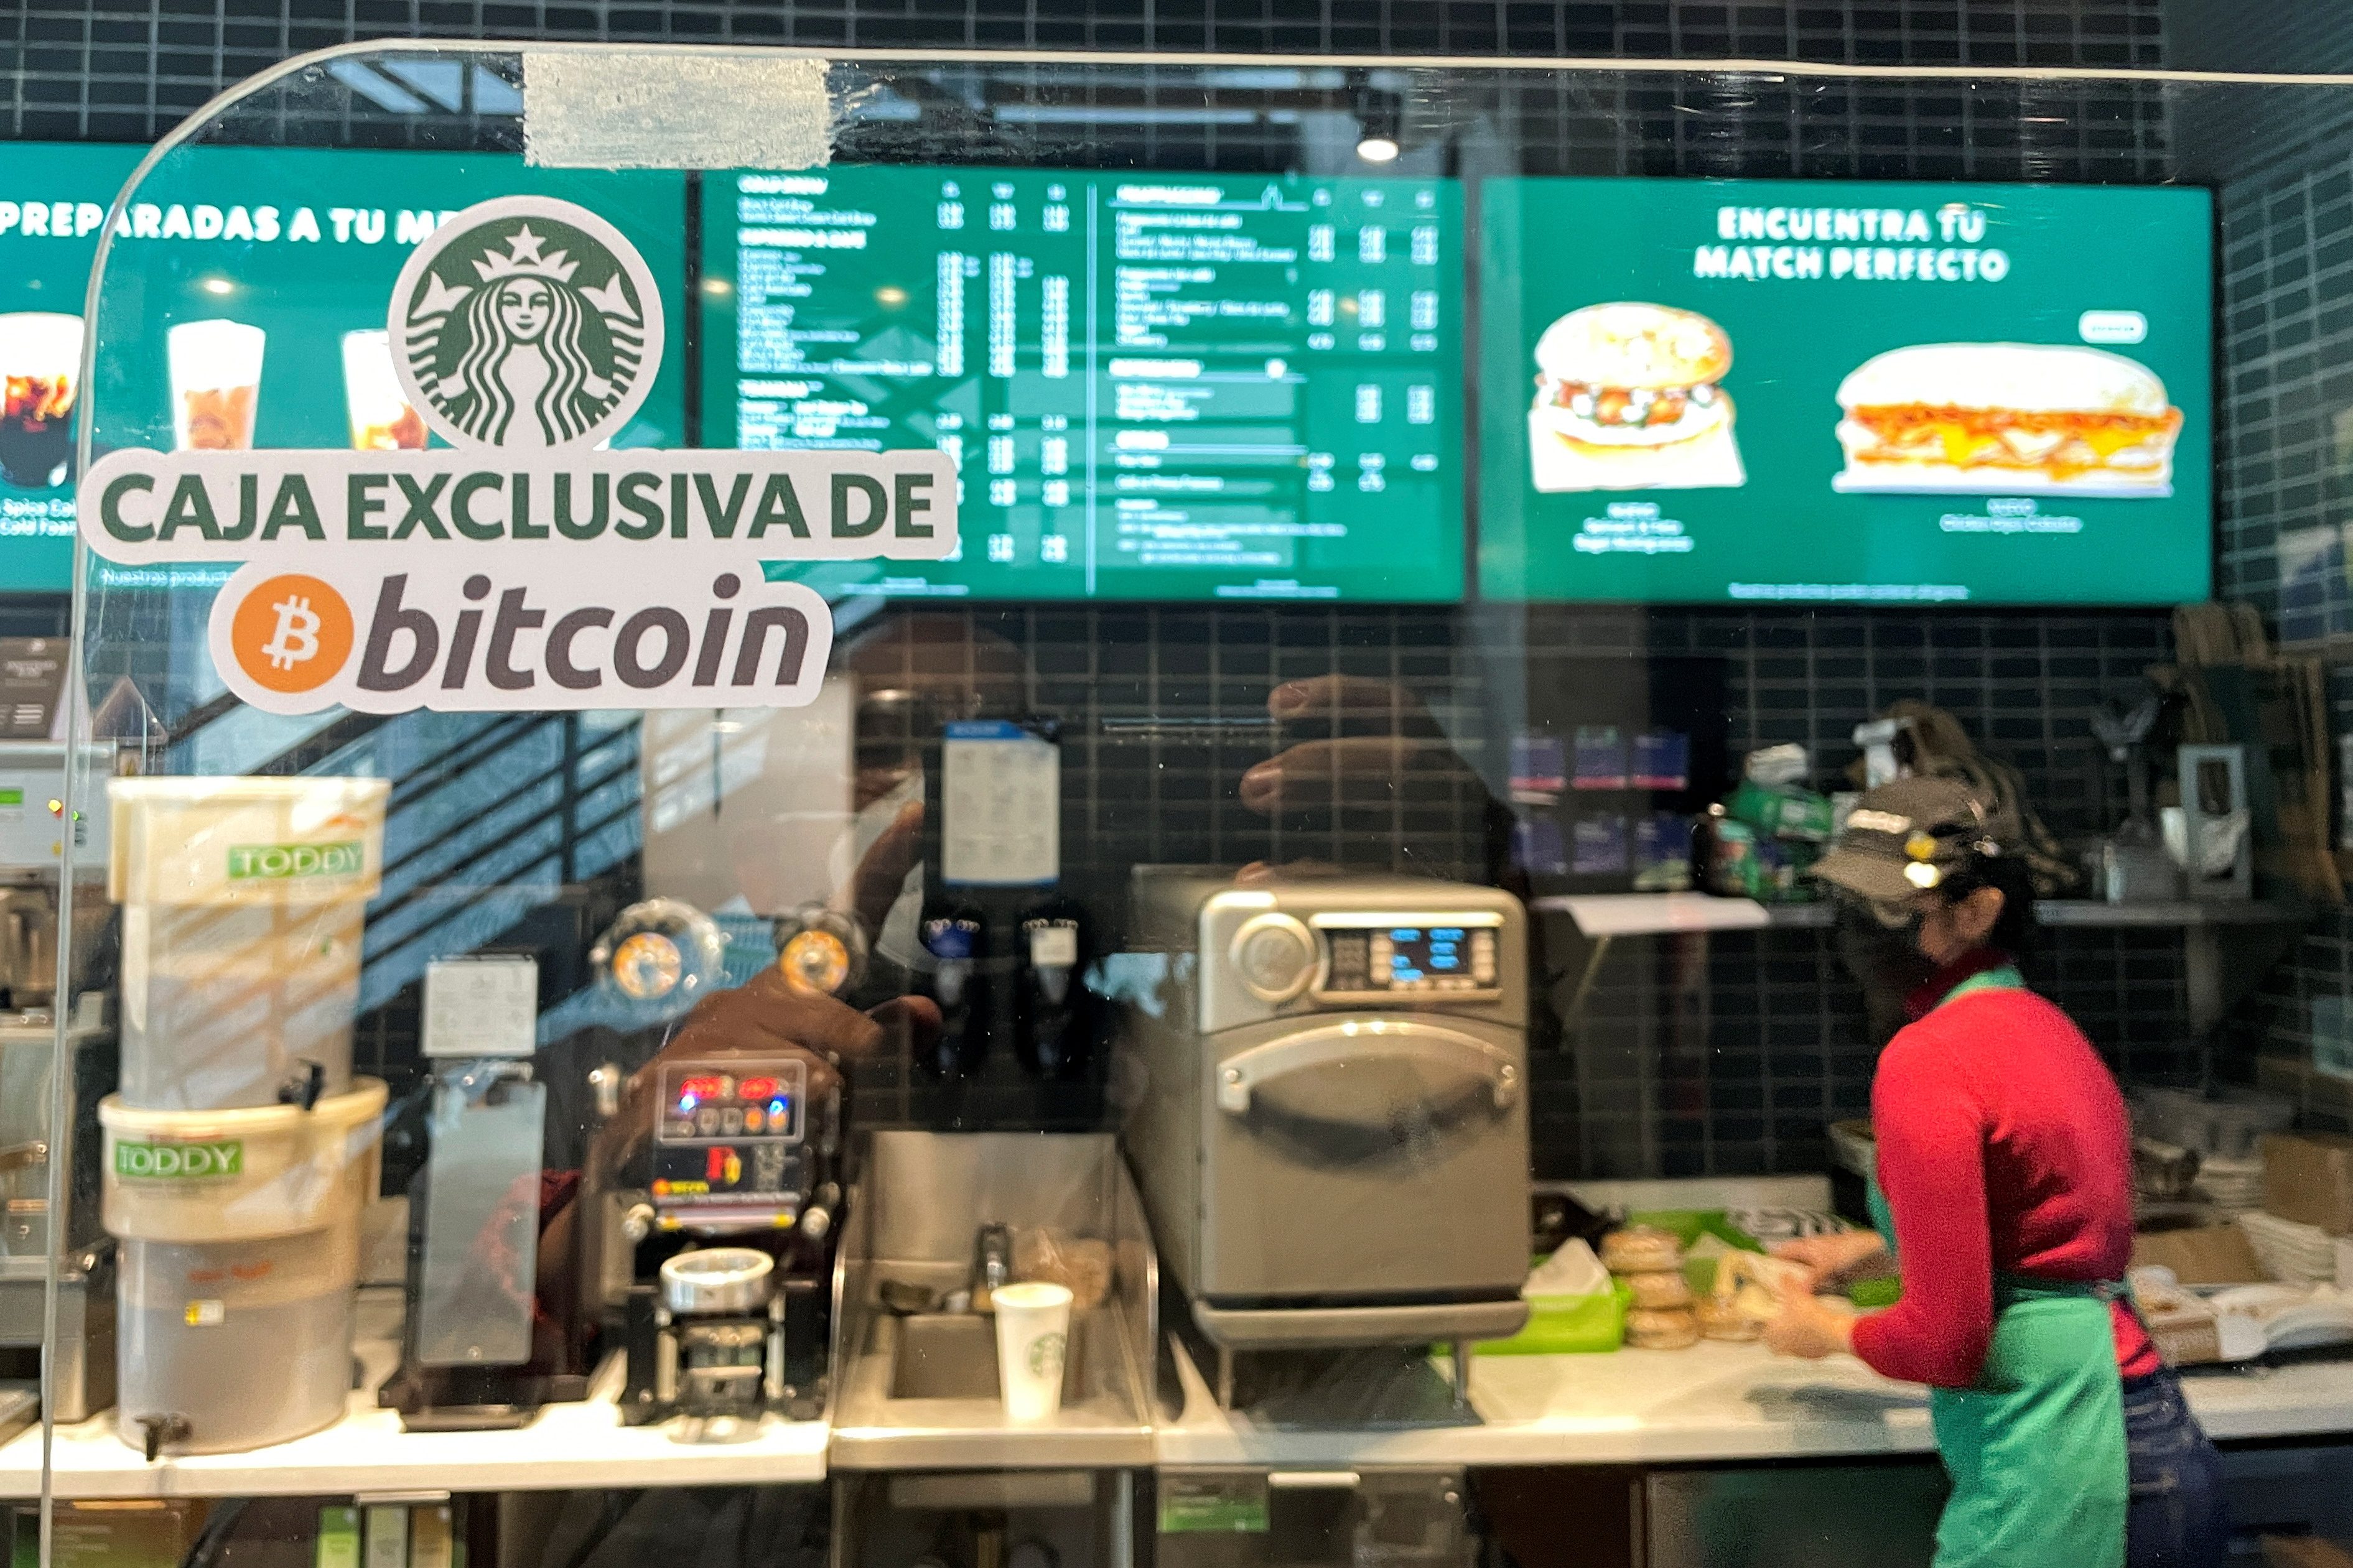 Bitcoin bruised after chaotic debut as legal tender in El Salvador